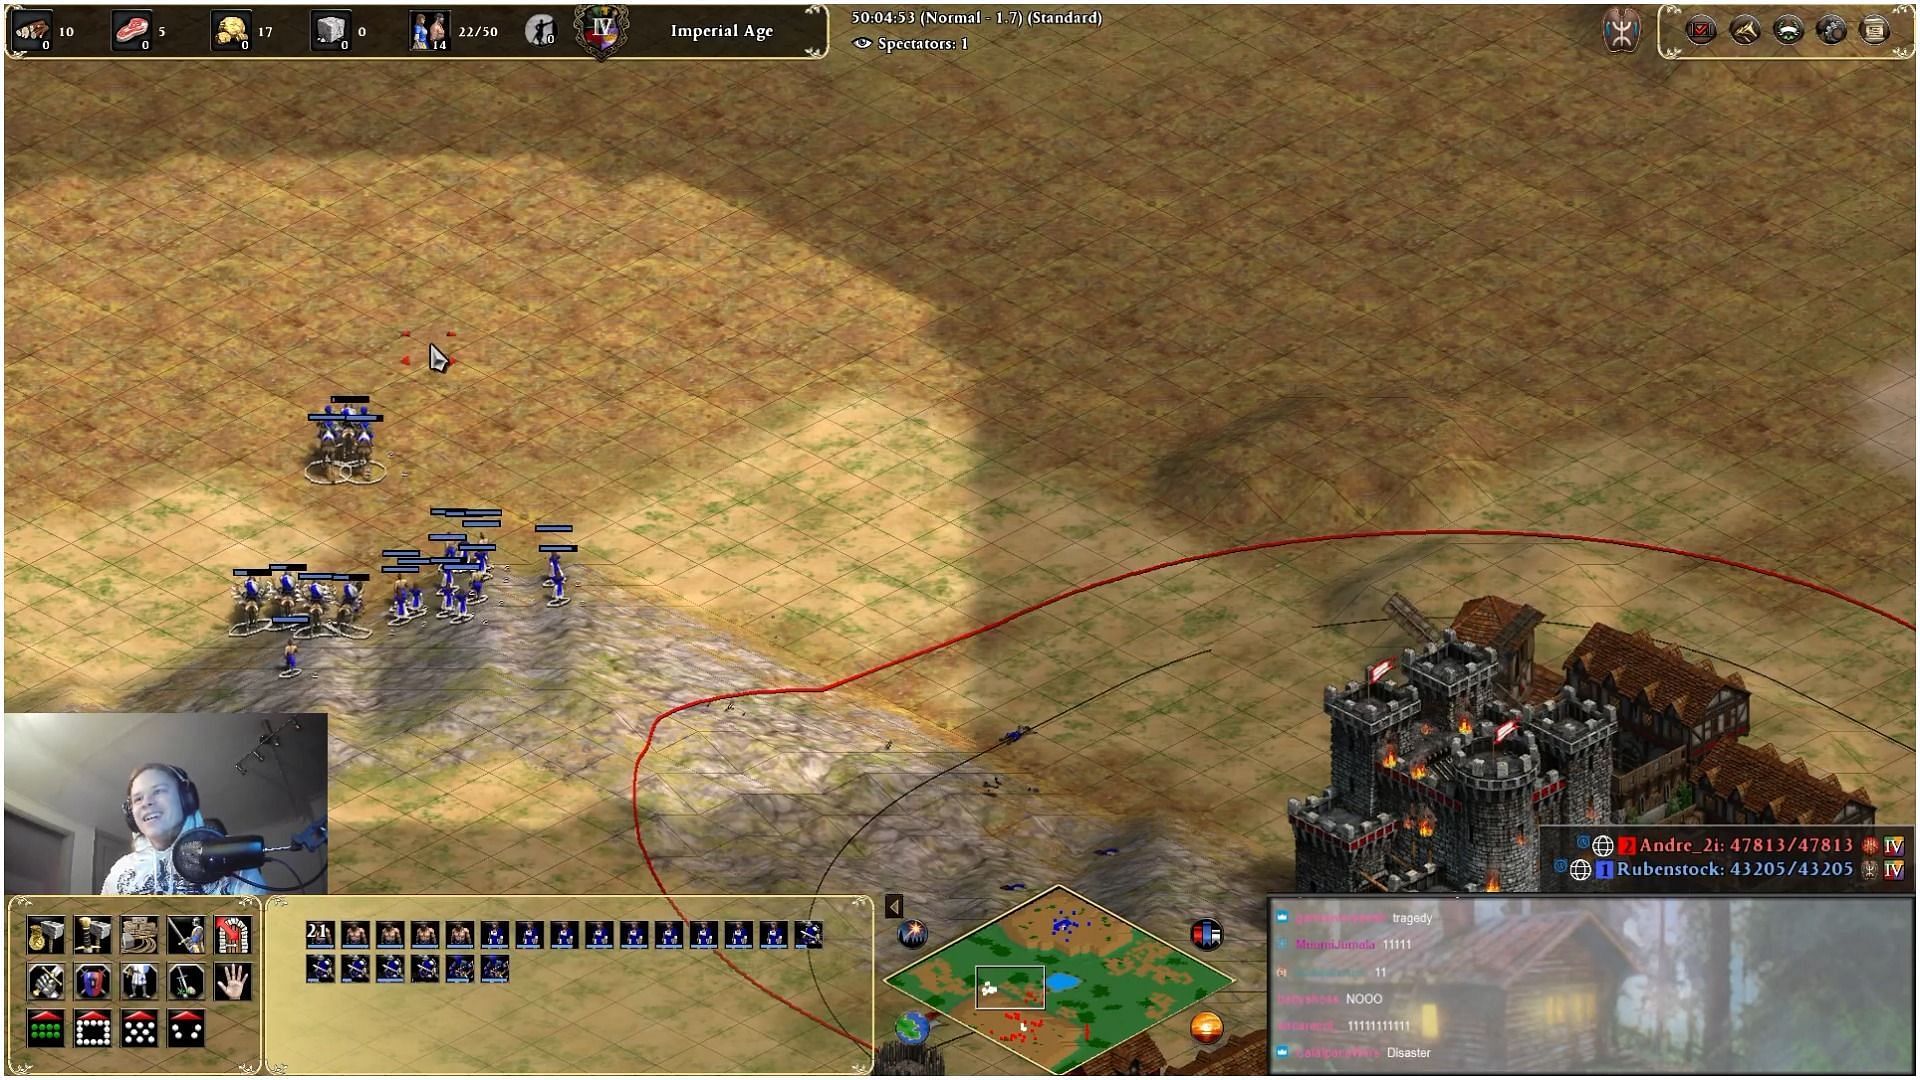 Age of Empires 2 match has been going for 40 hours with no end in sight (Image via Twitch Rubenstock)